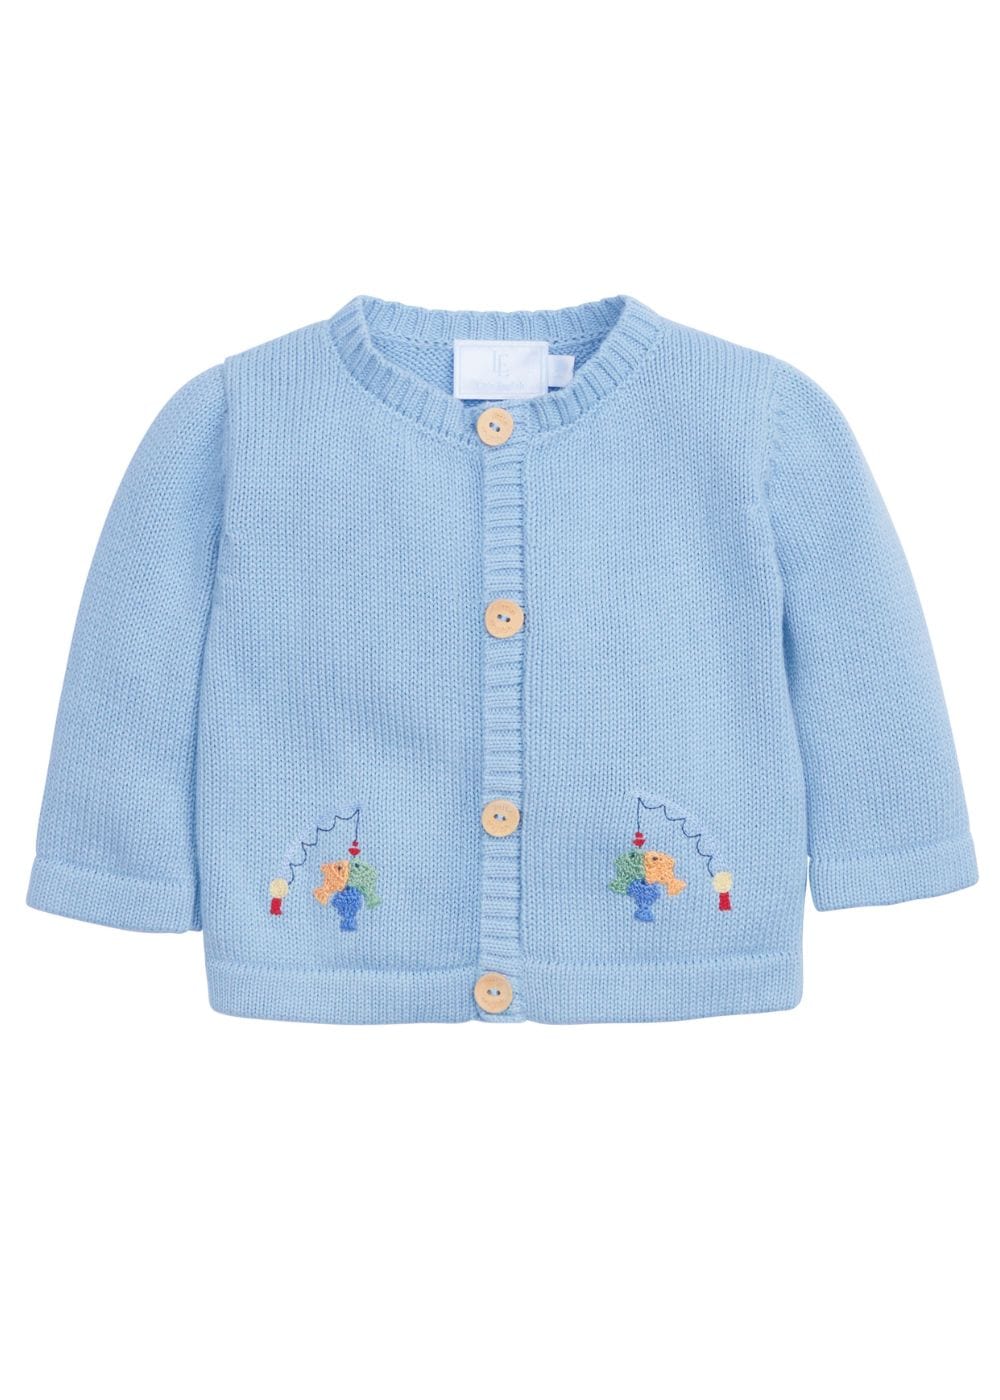 classic childrens clothing boys light blue sweater with crochet fishing emblem on front and back